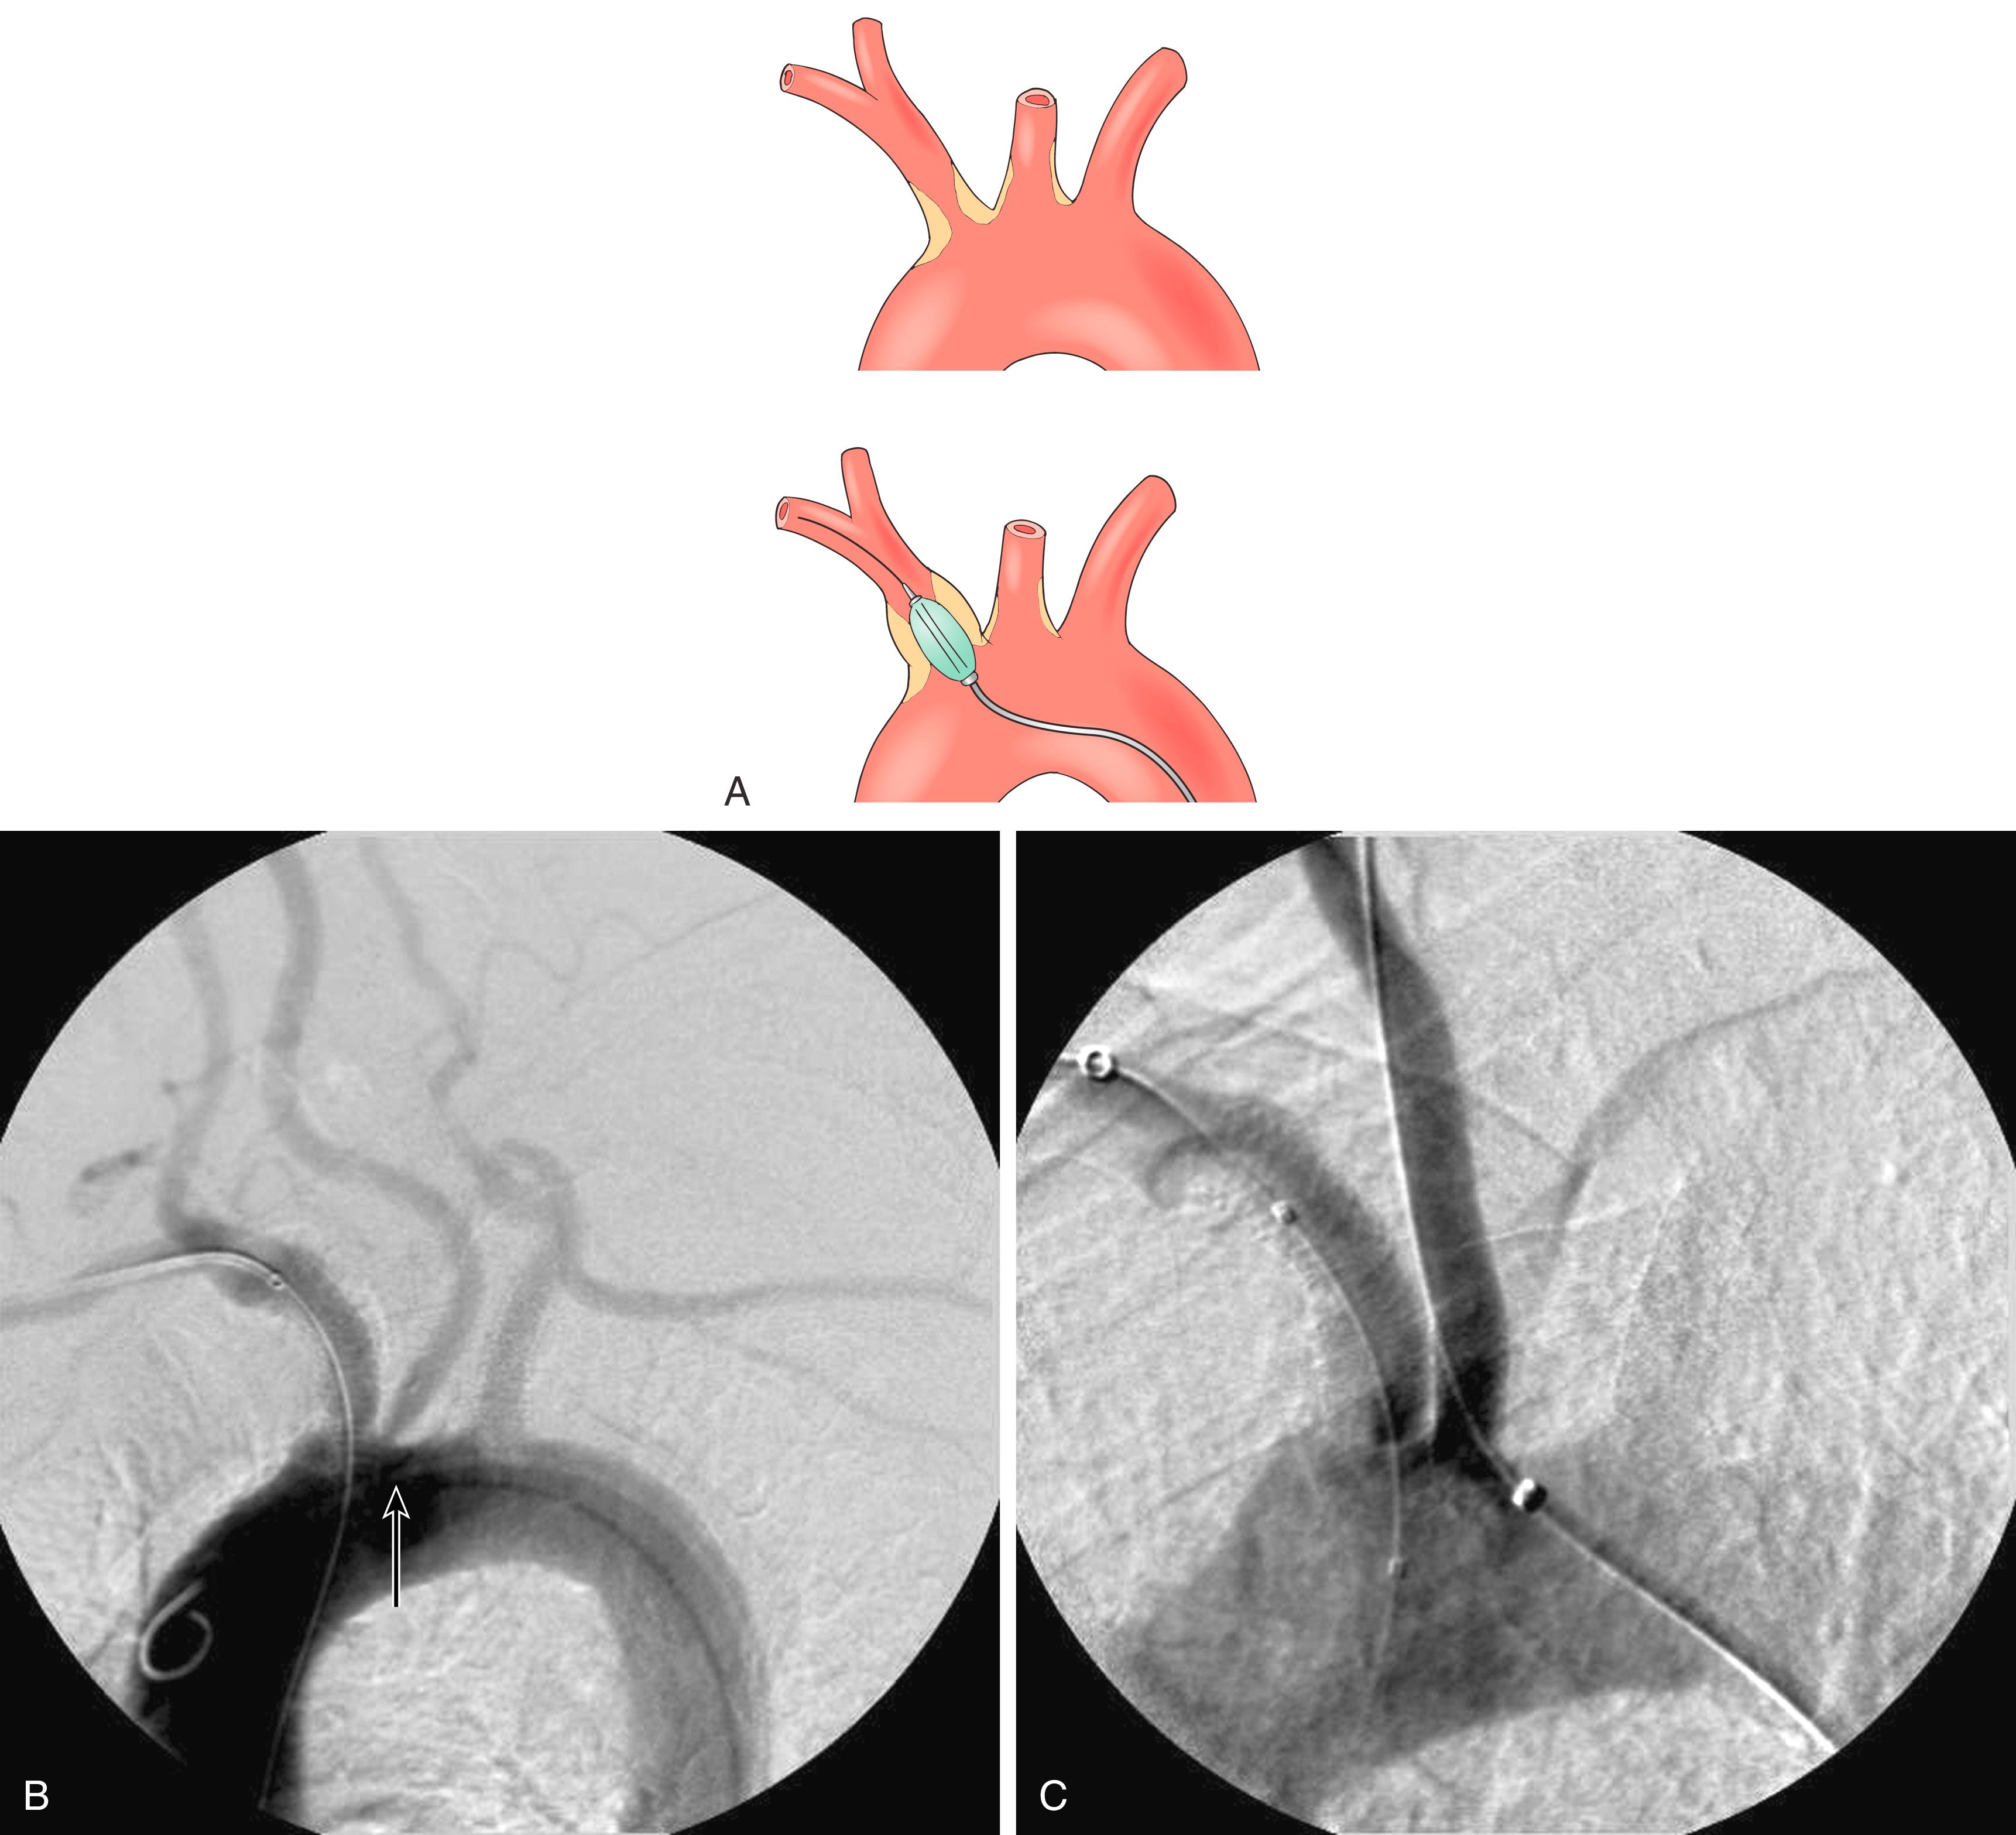 Figure 102.4, ( A ) Treatment of a neighboring arch vessel can force treatment of an adjacent arch branch. After treatment of the innominate artery, the left common carotid can be impinged on by a shift of aortic plaque, thus necessitating intervention in the left common carotid origin. ( B ) A successfully treated innominate artery has shifted aortic plaque, which resulted in stenosis at the origin of the left common carotid artery ( arrow ). ( C ) Treatment of the common carotid origin and simultaneous protection of the innominate artery’s stented origin.